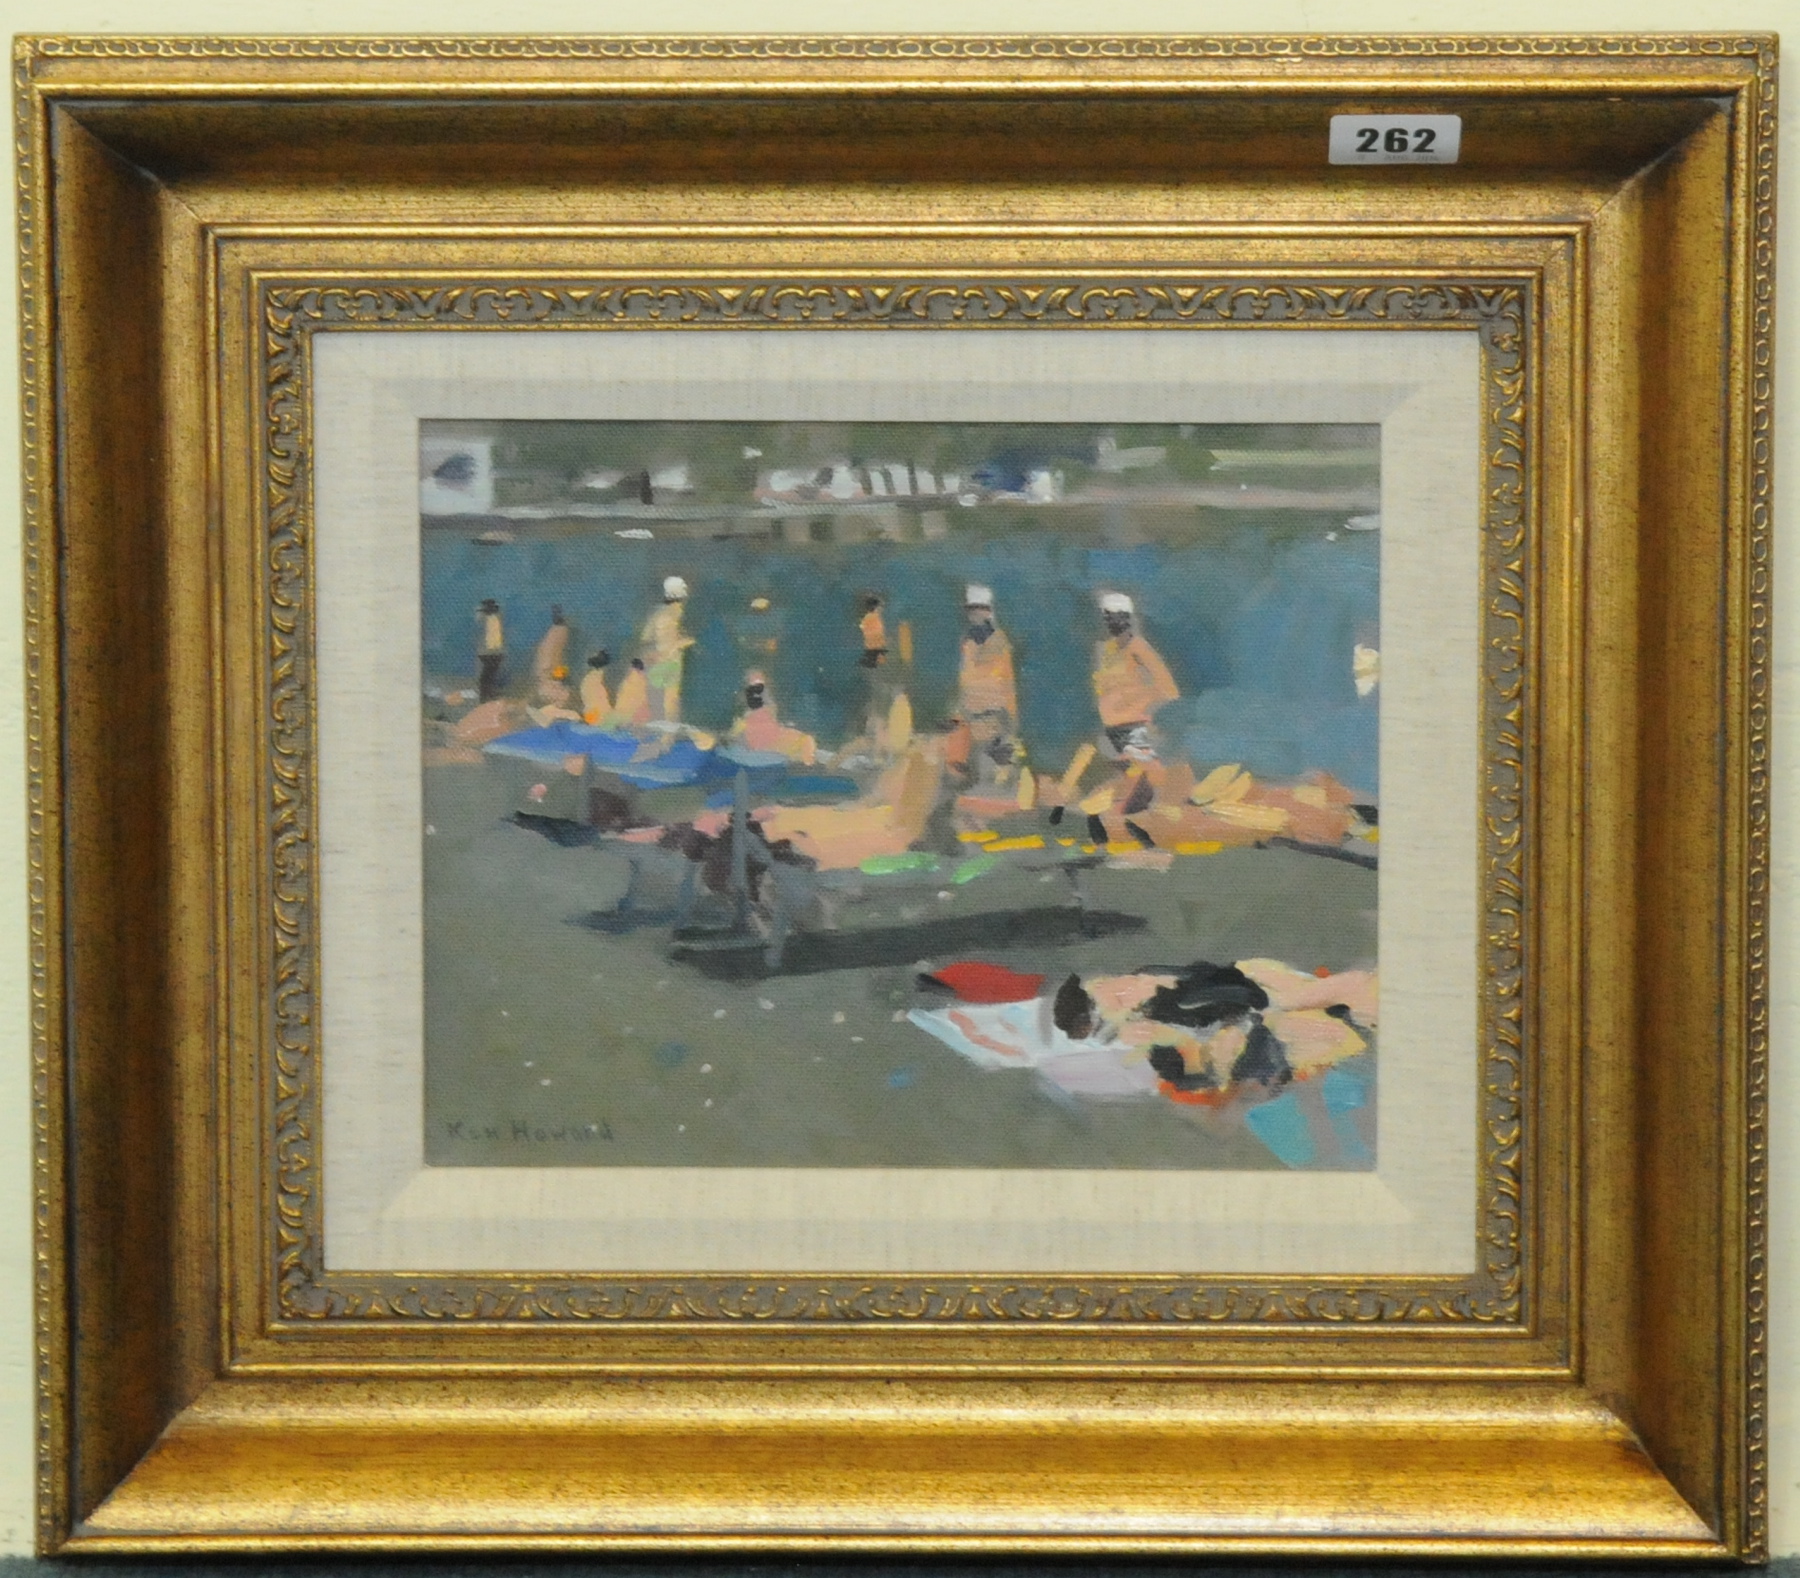 KEN HOWARD.
"Morning Beach, Volcano".
Oil on board. 8" x 10".
Signed, inscribed with title on